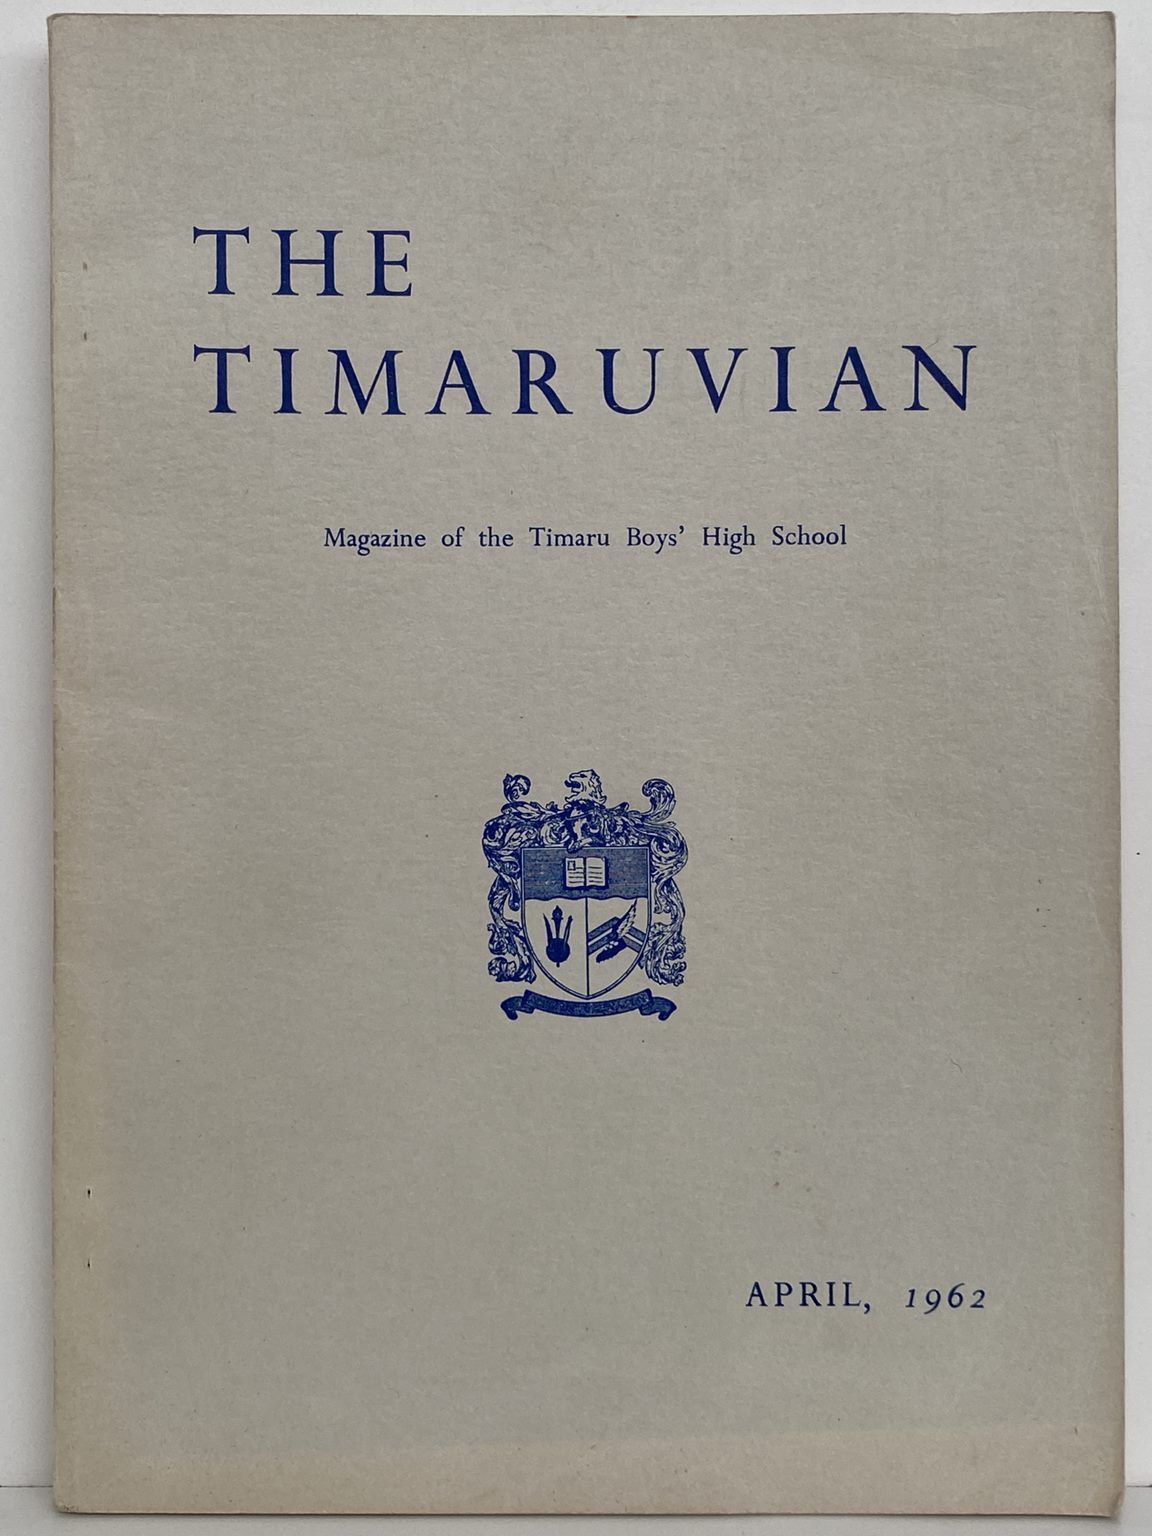 THE TIMARUVIAN: Magazine of the Timaru Boys' High School and its Old Boys' Association 1962